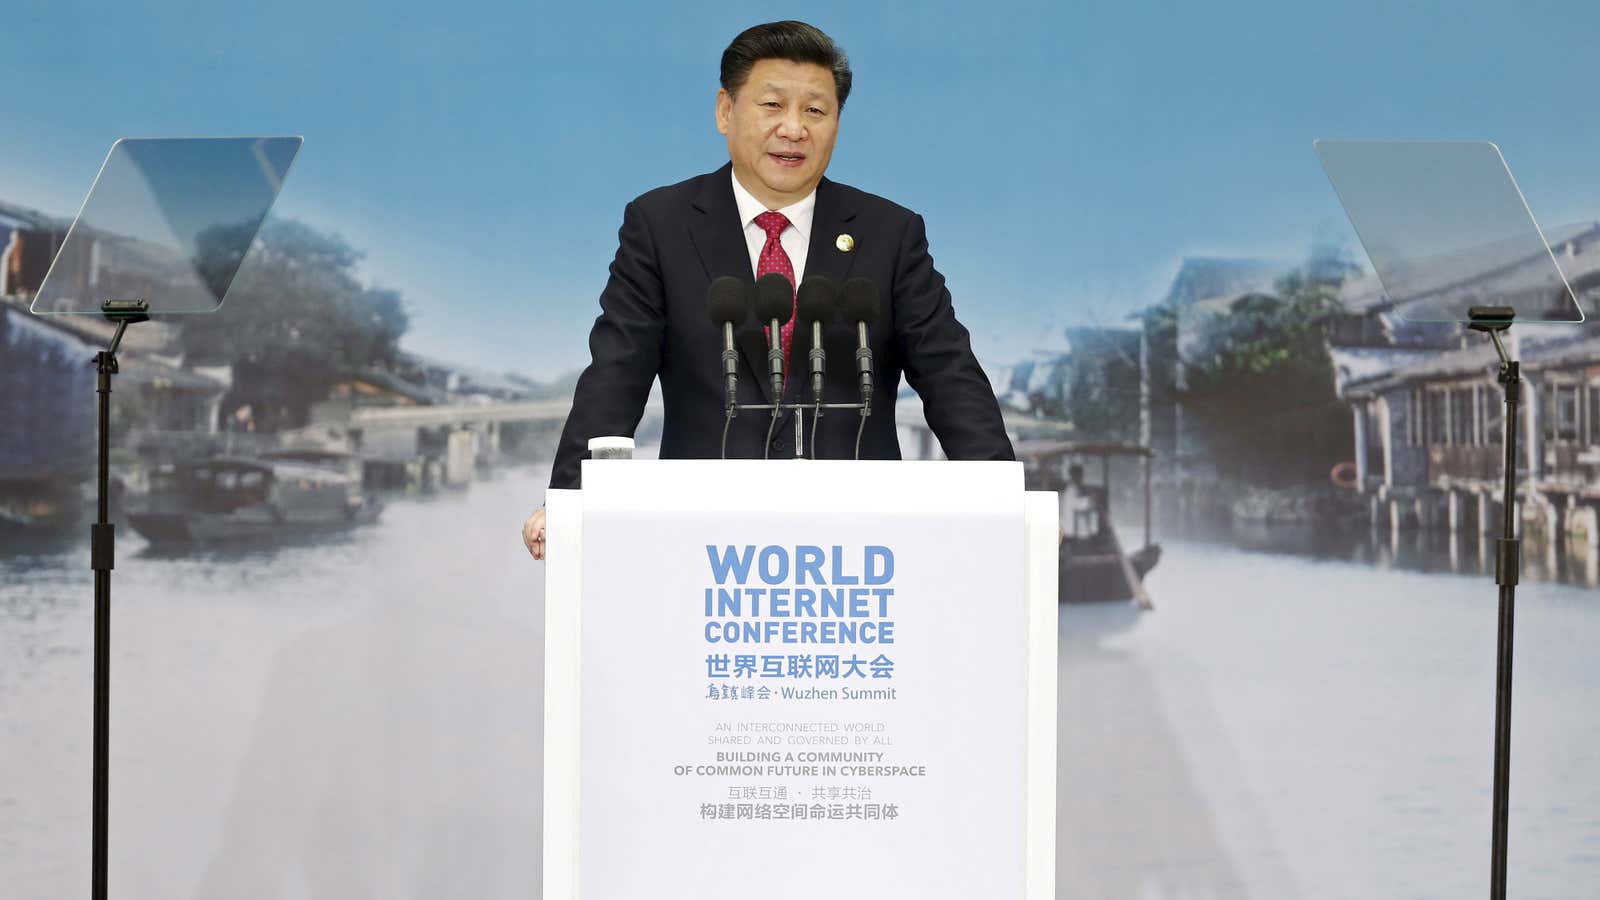 Xi Jinping at the 2015 World Internet Conference.